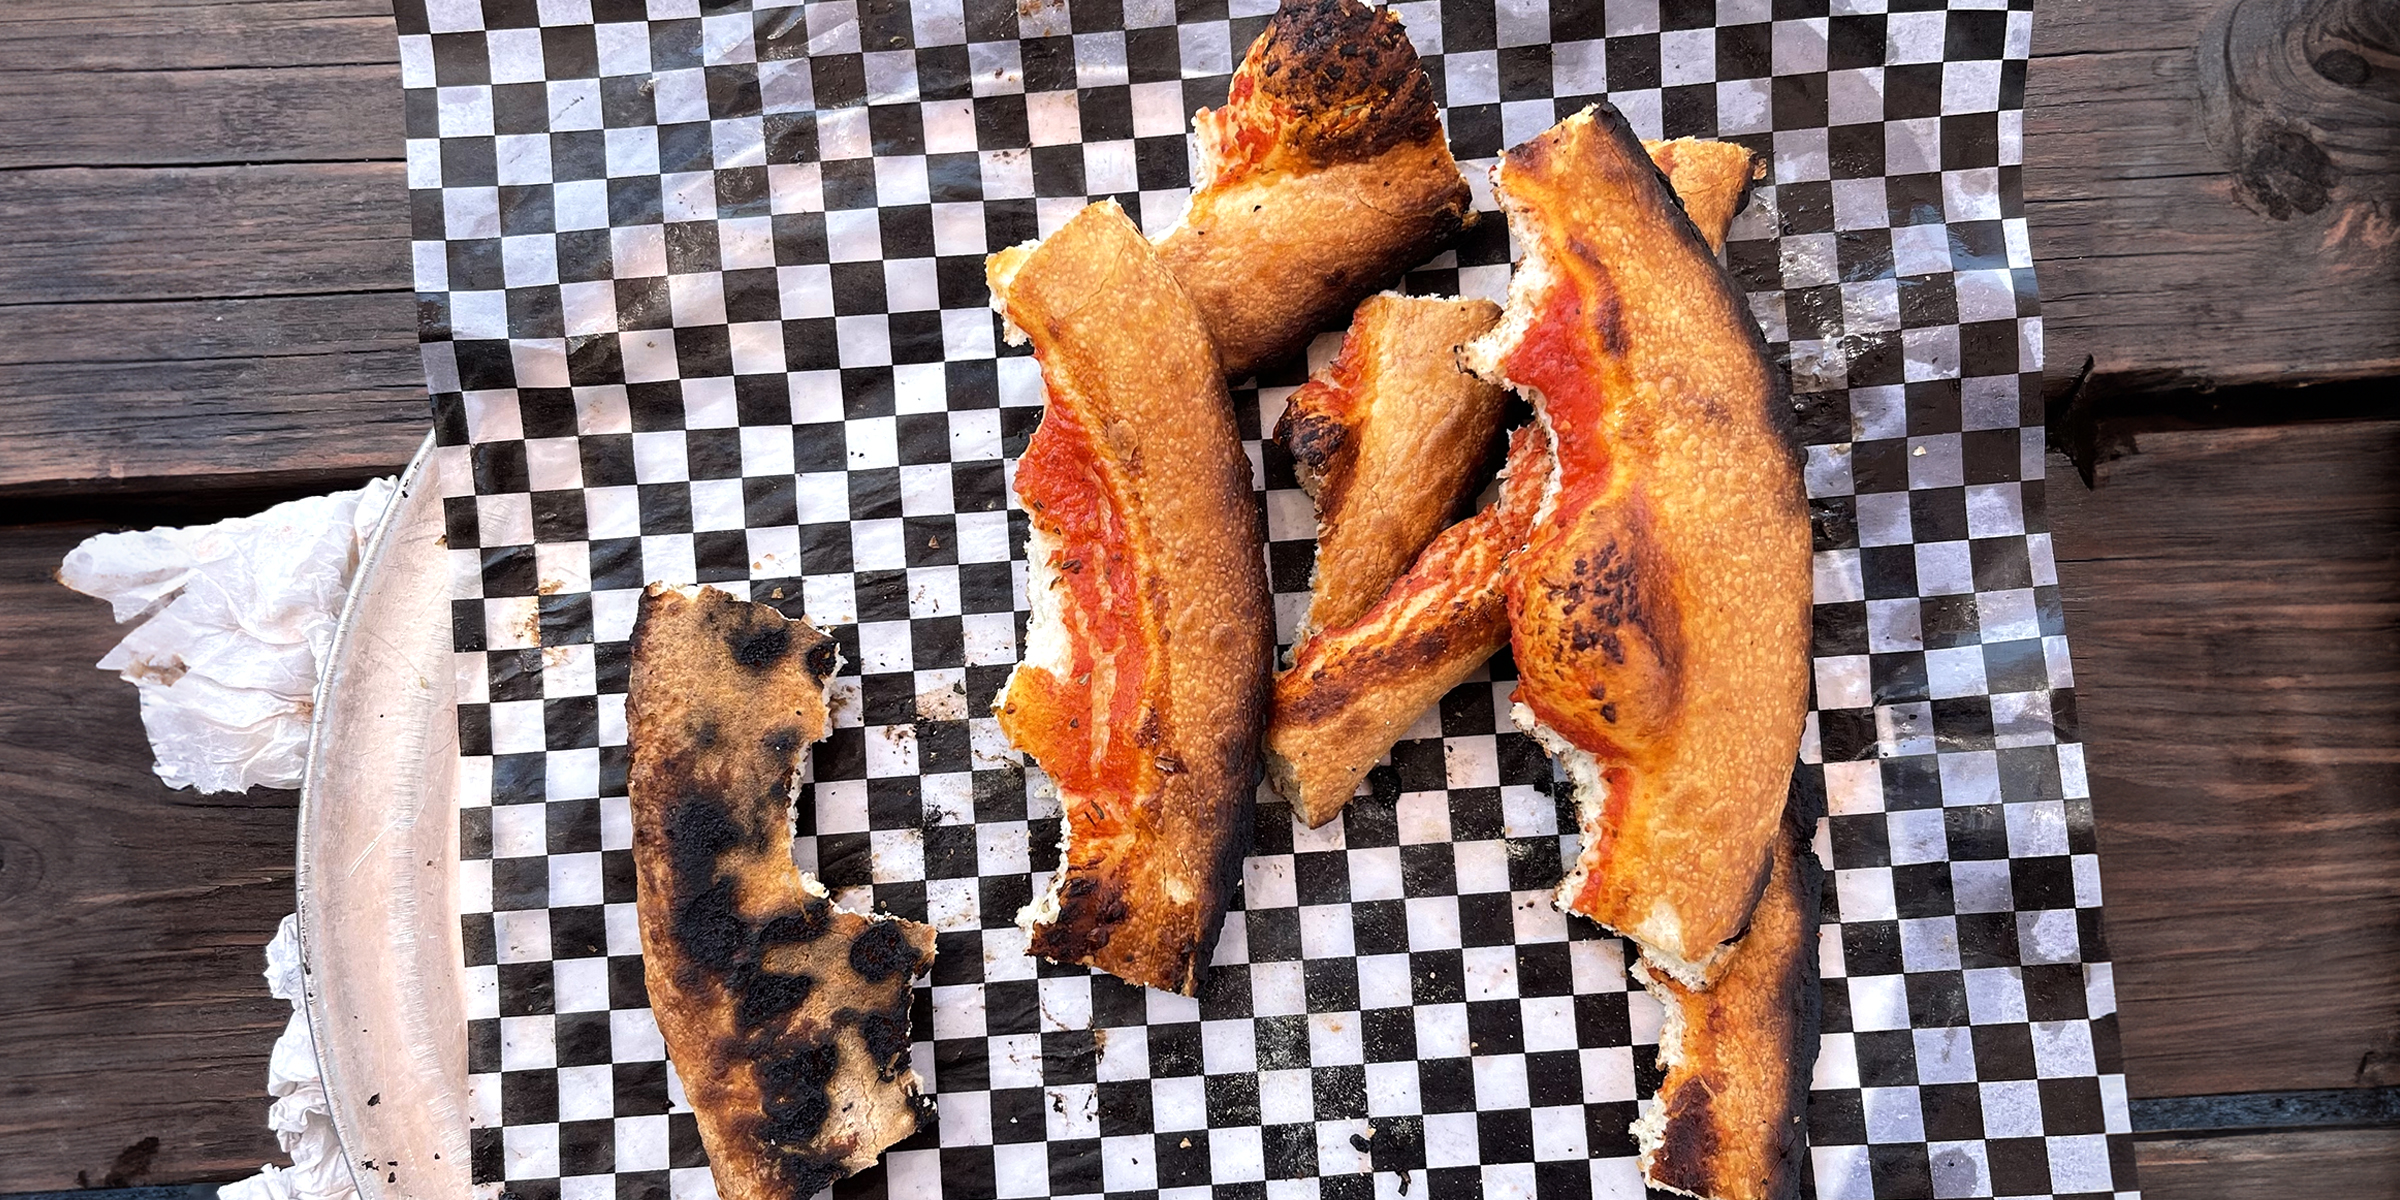 A bunch of burnt pizza crusts | Source: Flickr.com/sarahstierch/CC BY 2.0